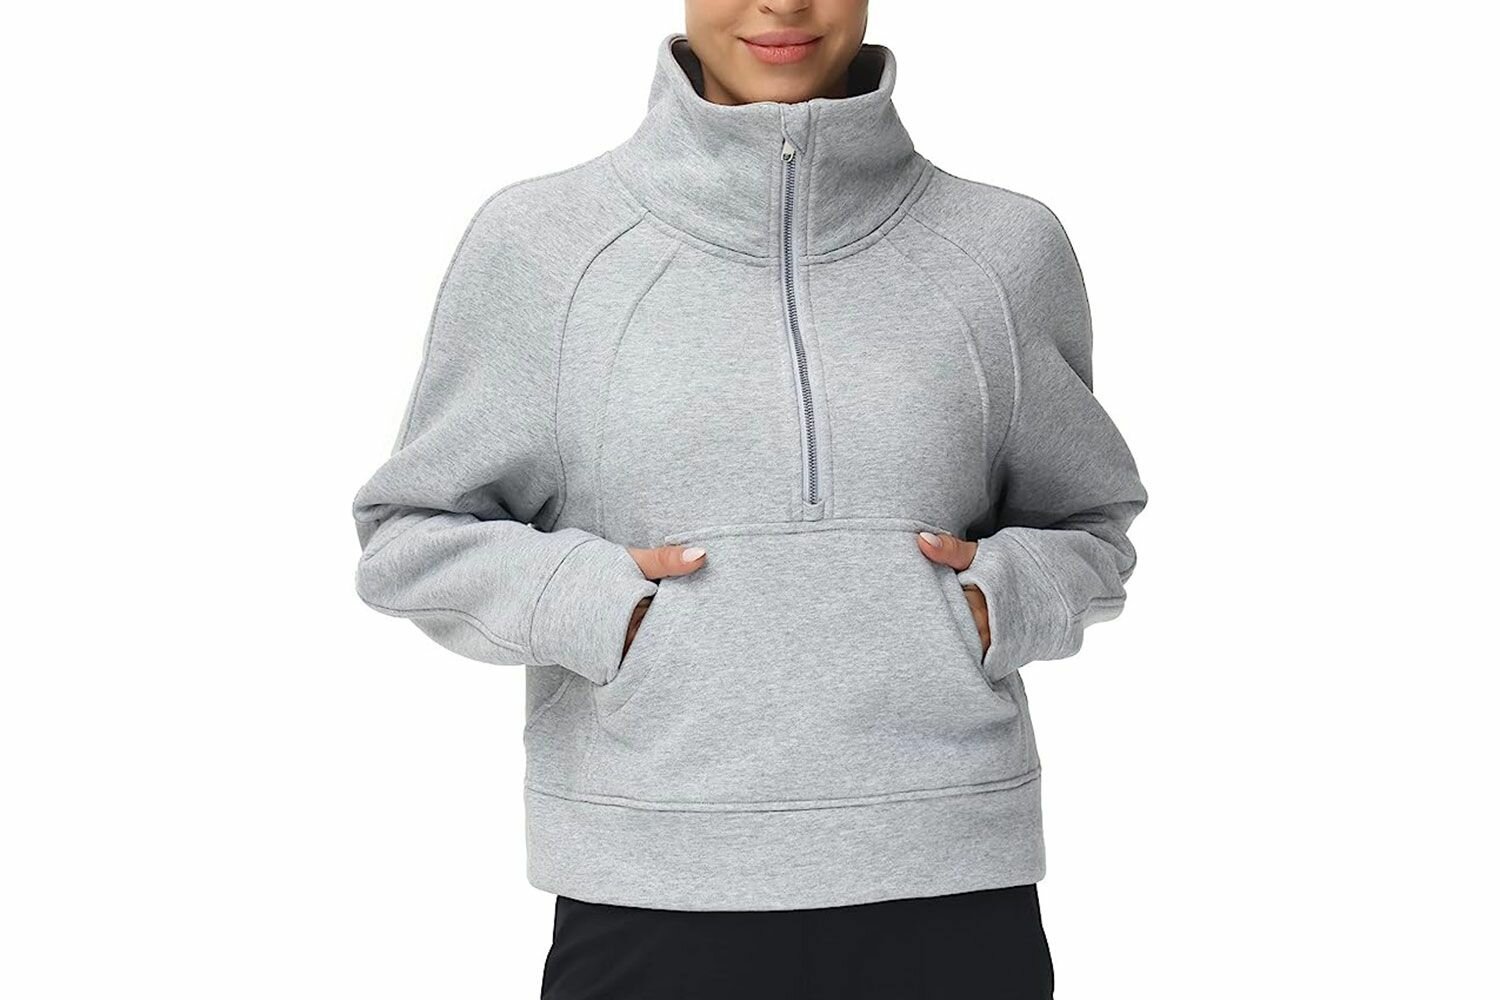 Amazon THE GYM PEOPLE Womens' Half Zip Pullover